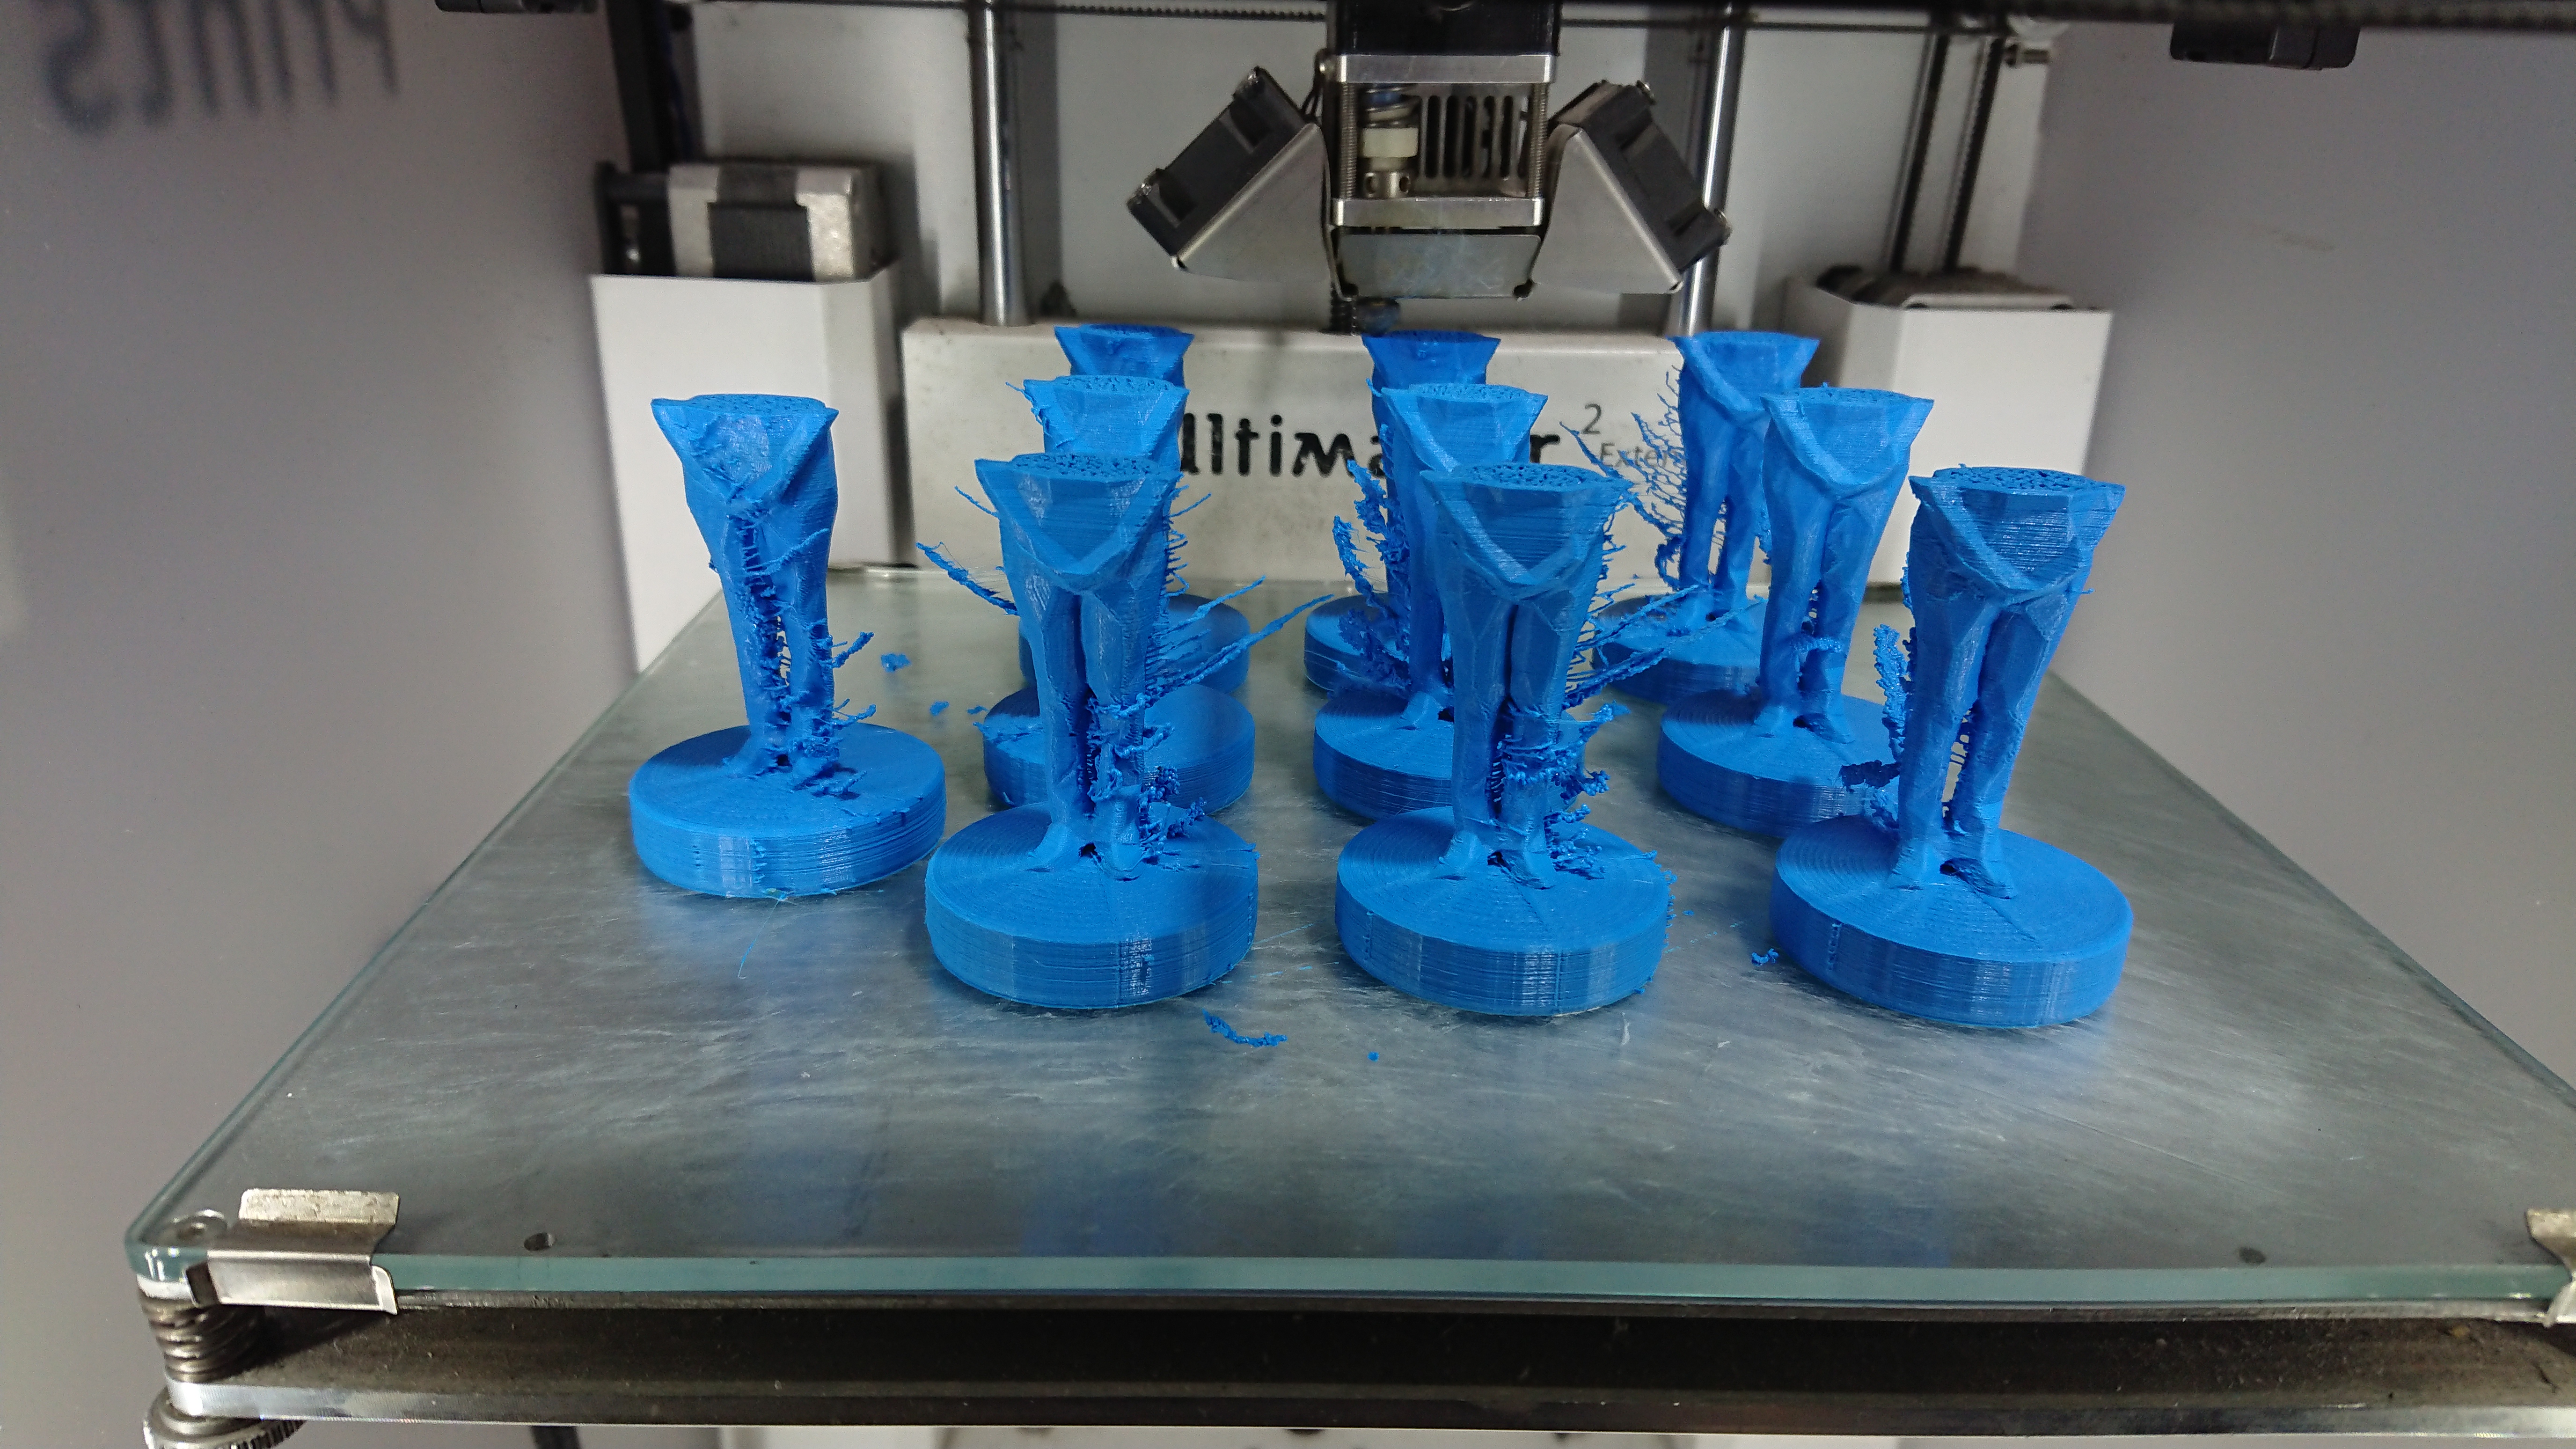 Ten blue figurines, in the middle of being 3D printed